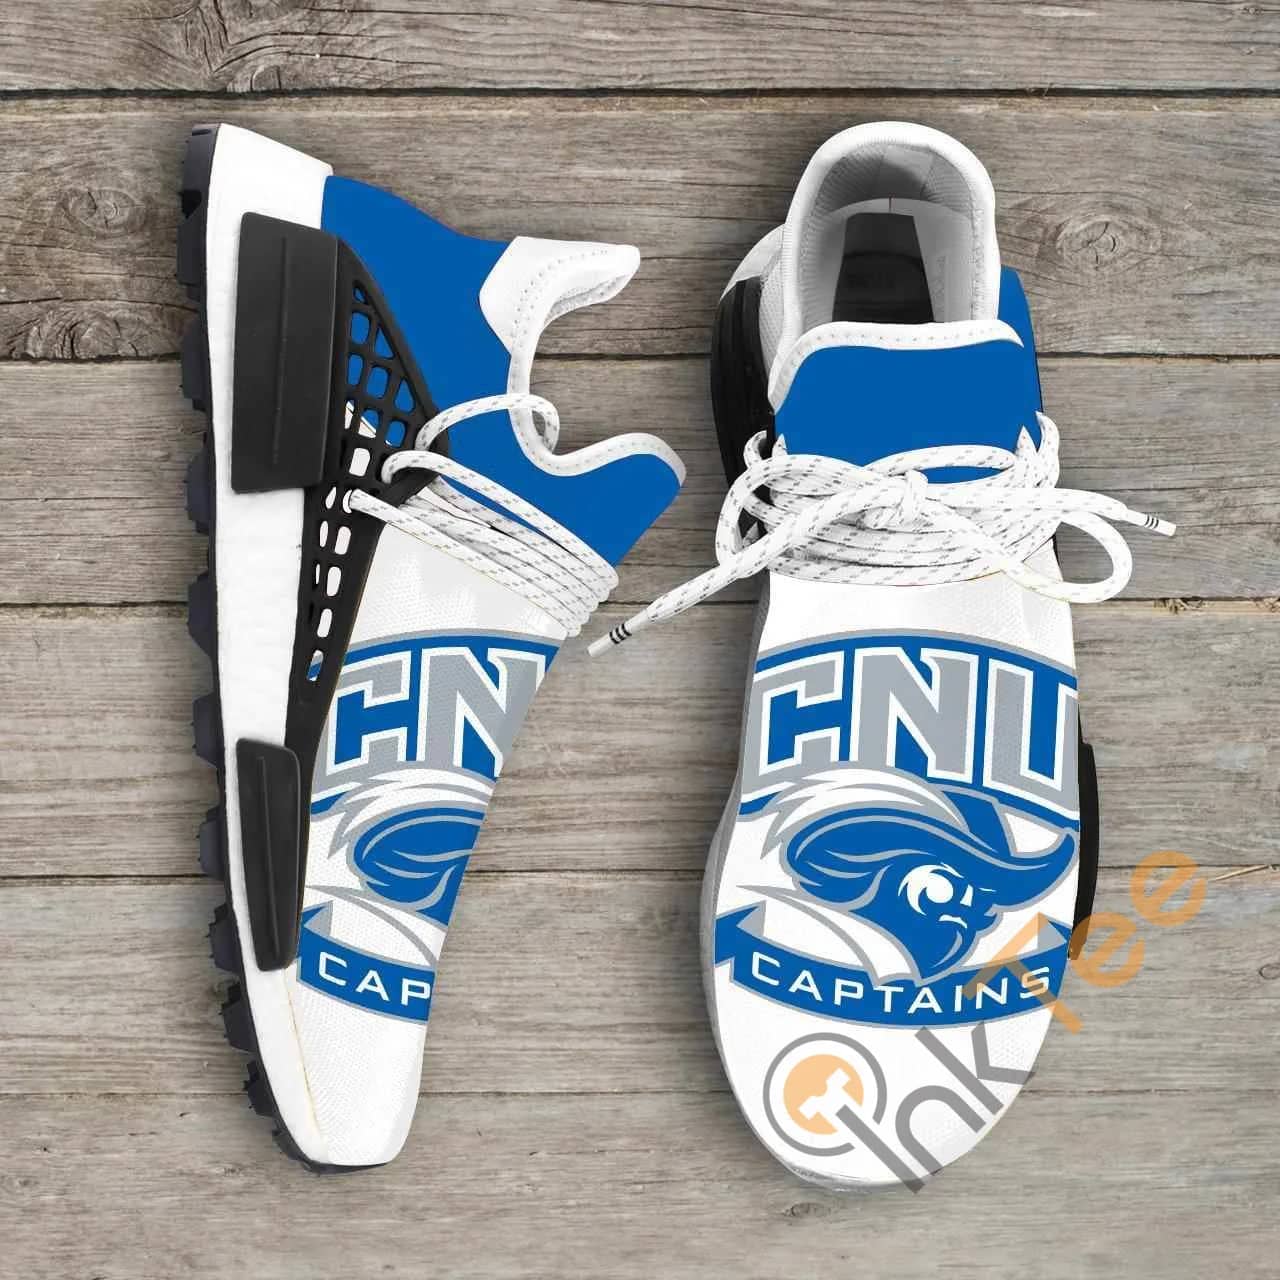 Christopher Newport Captains Ncaa Nmd Human Shoes